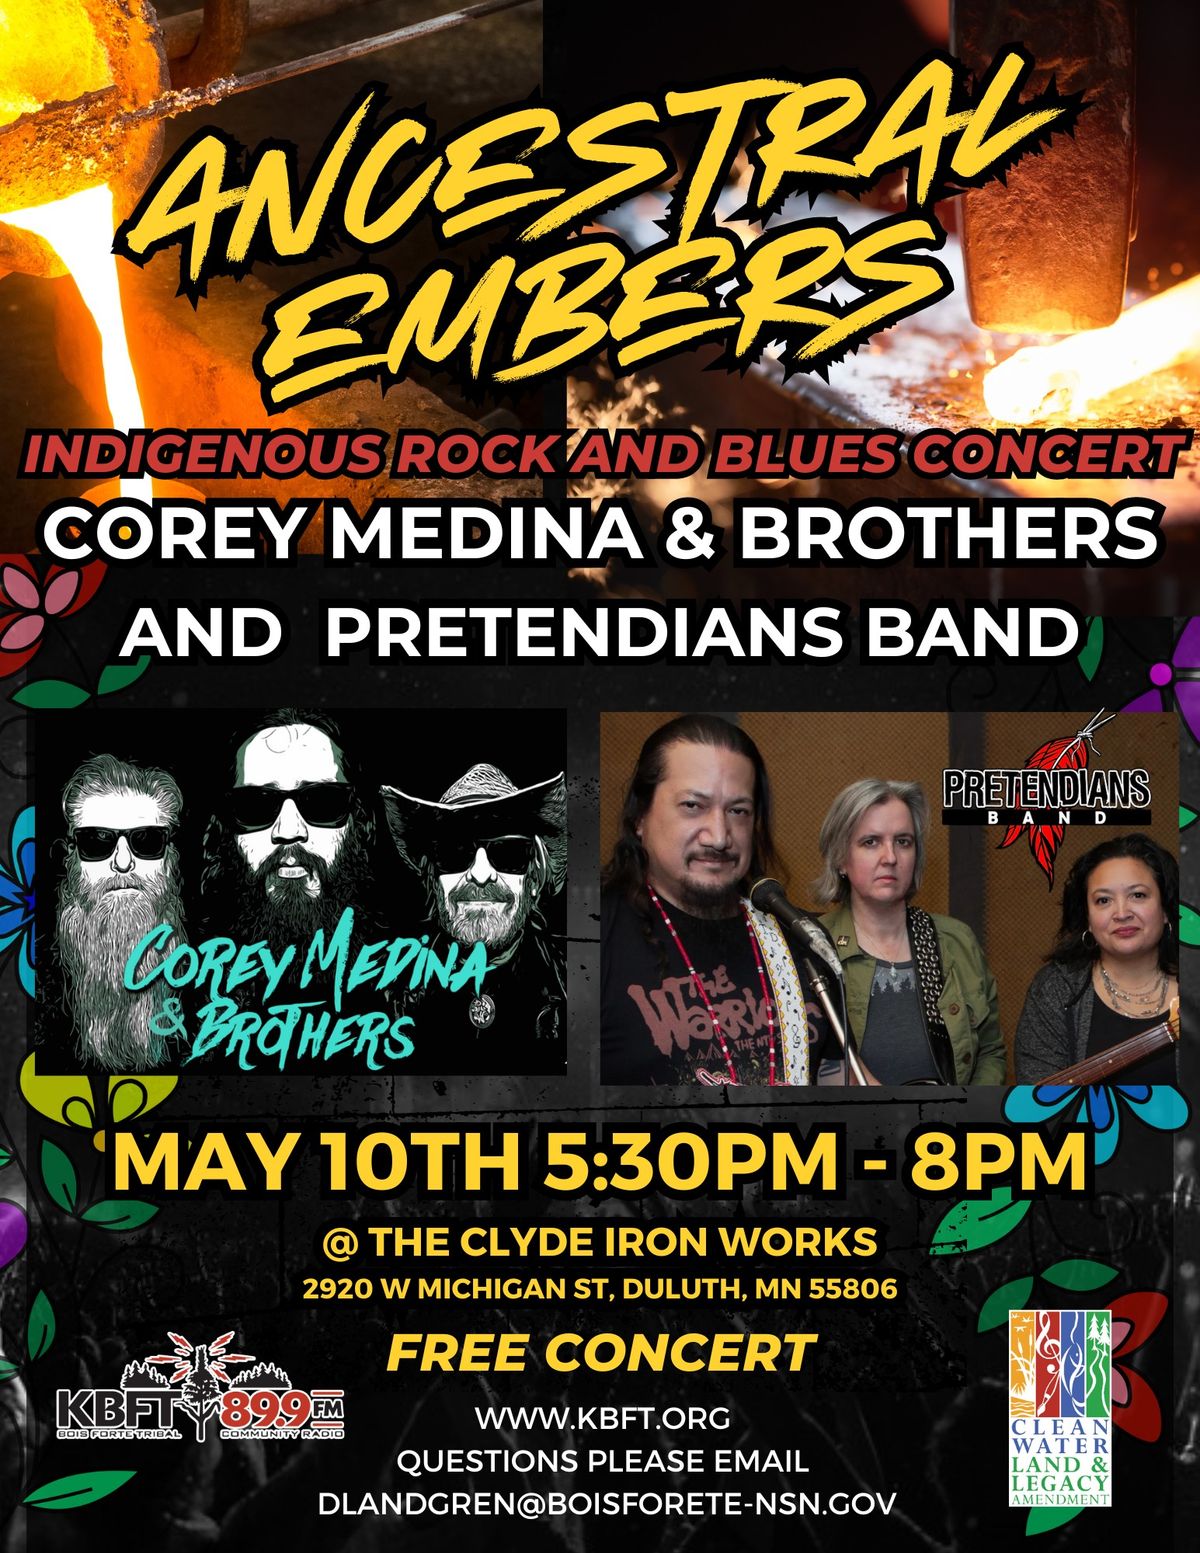 Ancestral Embers Blues & Rock Concert ft. Corey Medina & Brothers and Pretendians Band 